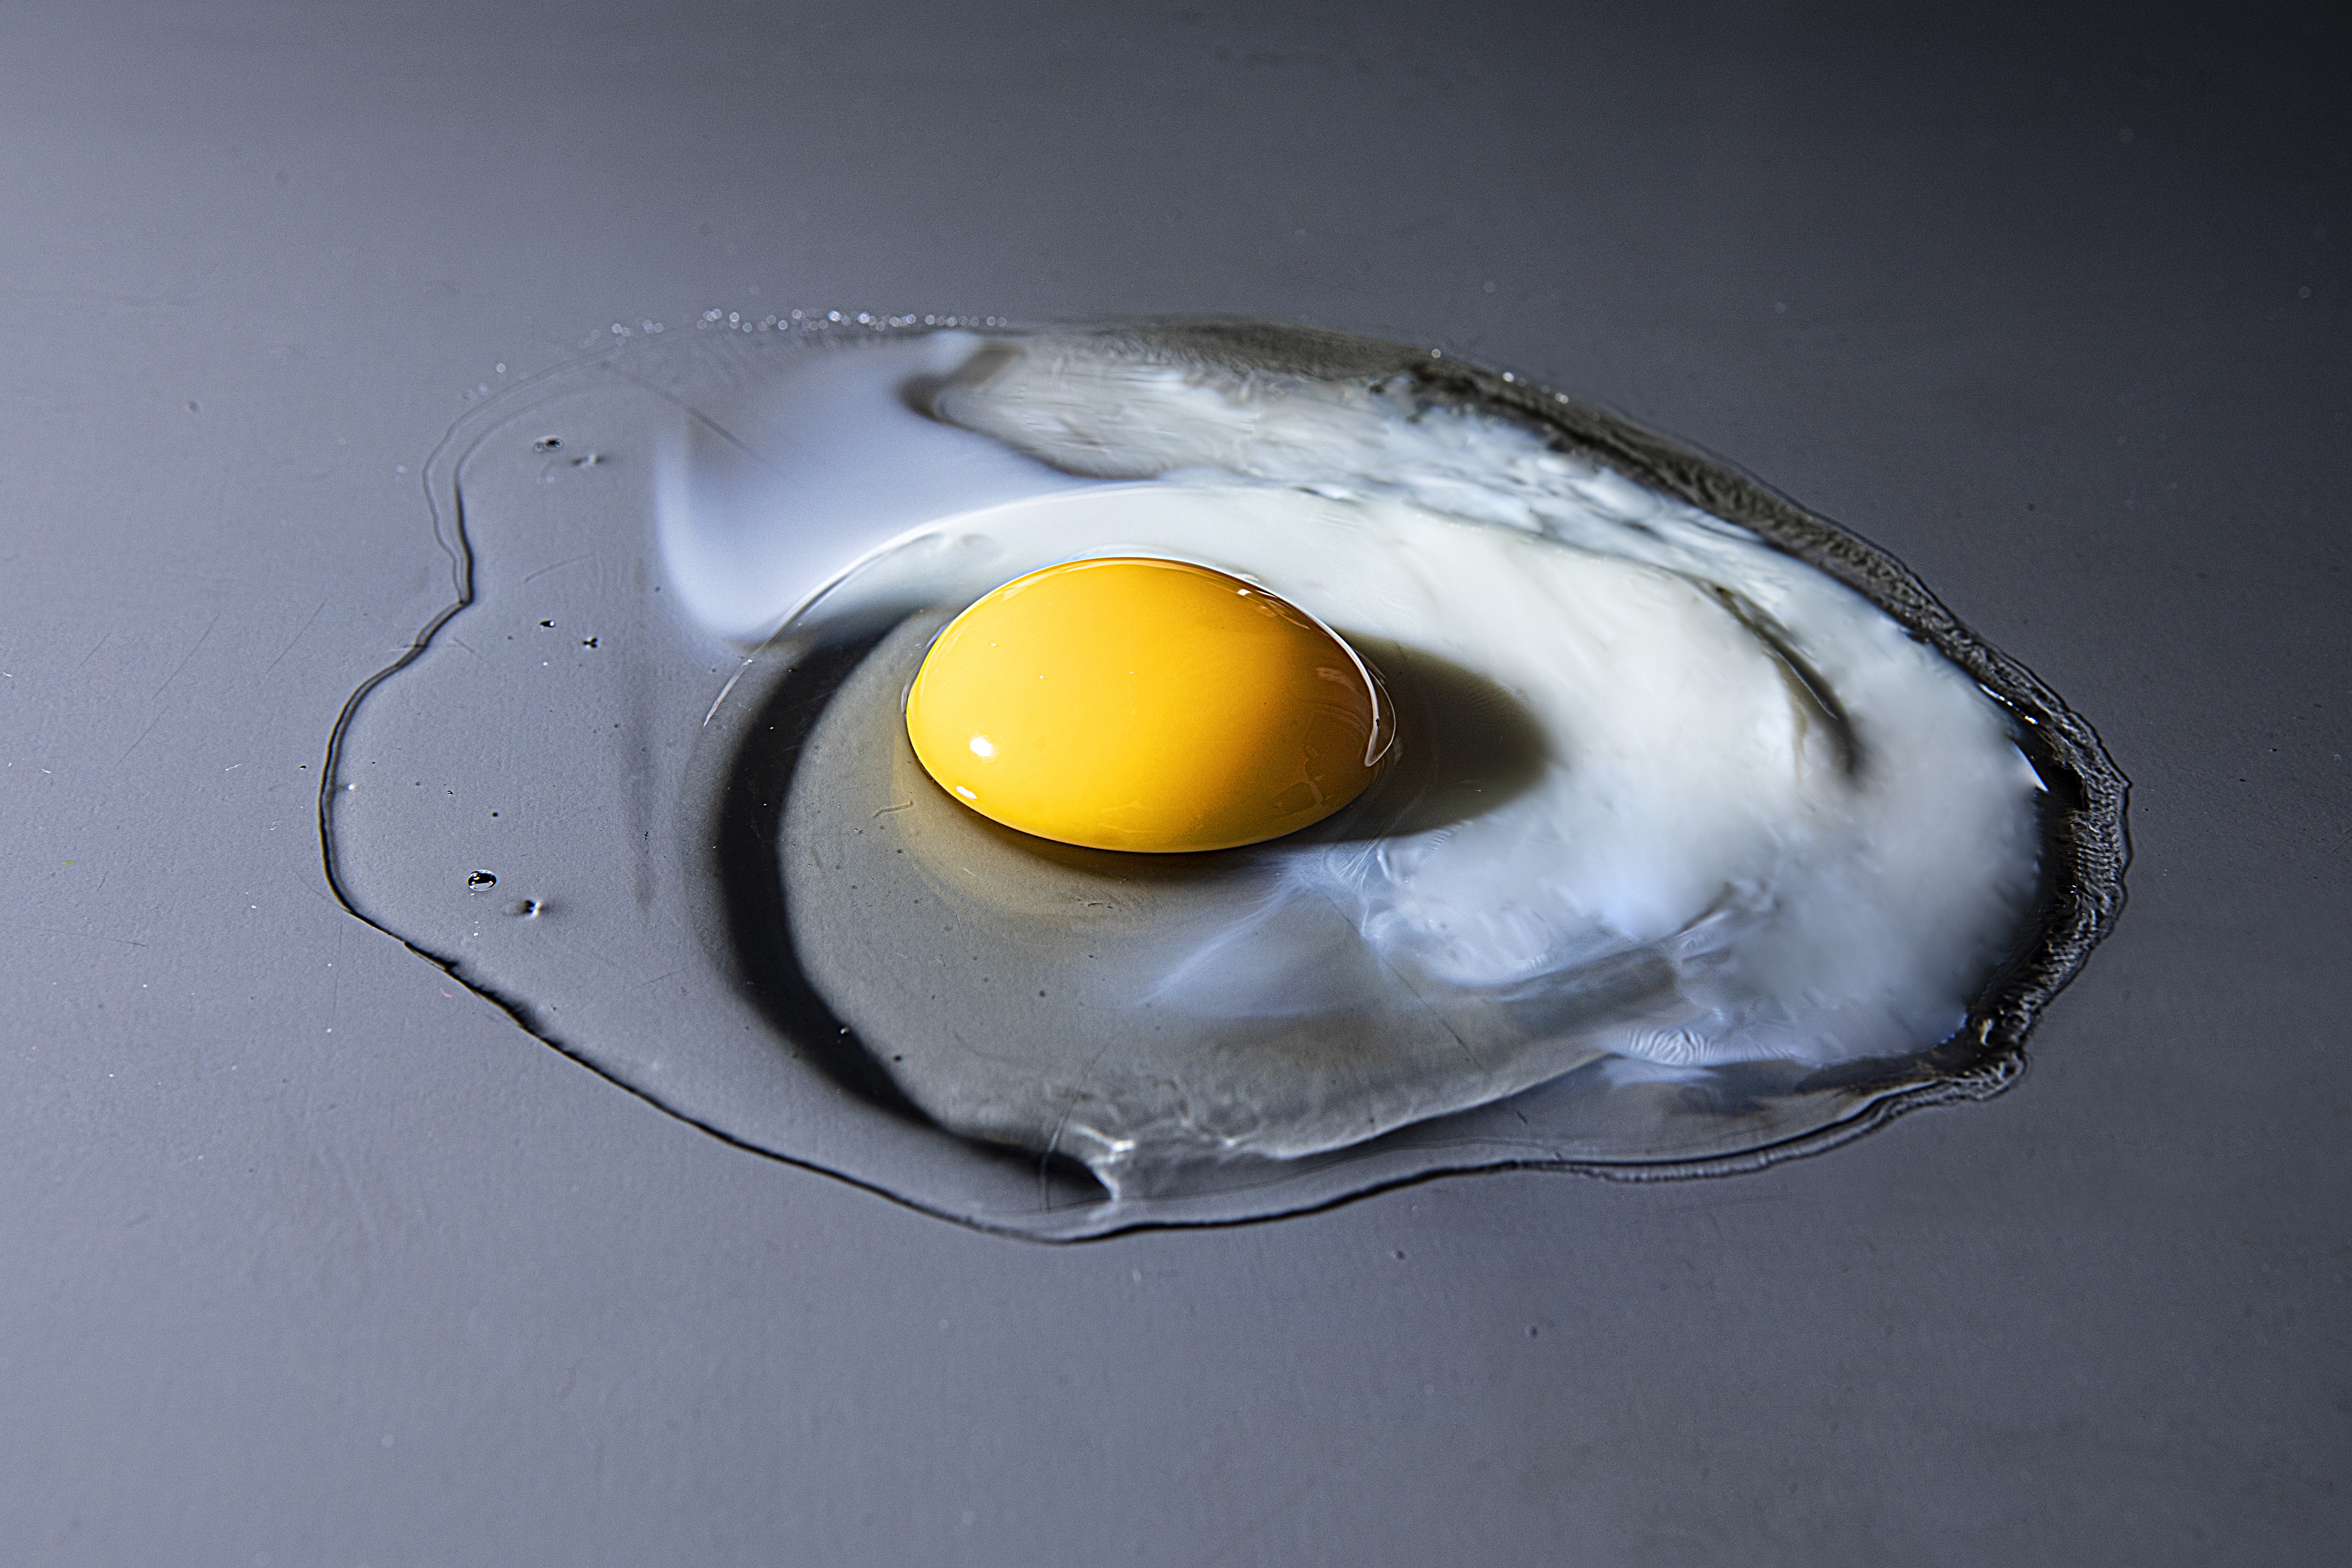 When heated, the proteins in the originally transparent chicken egg white form a tightly meshed, opaque network.